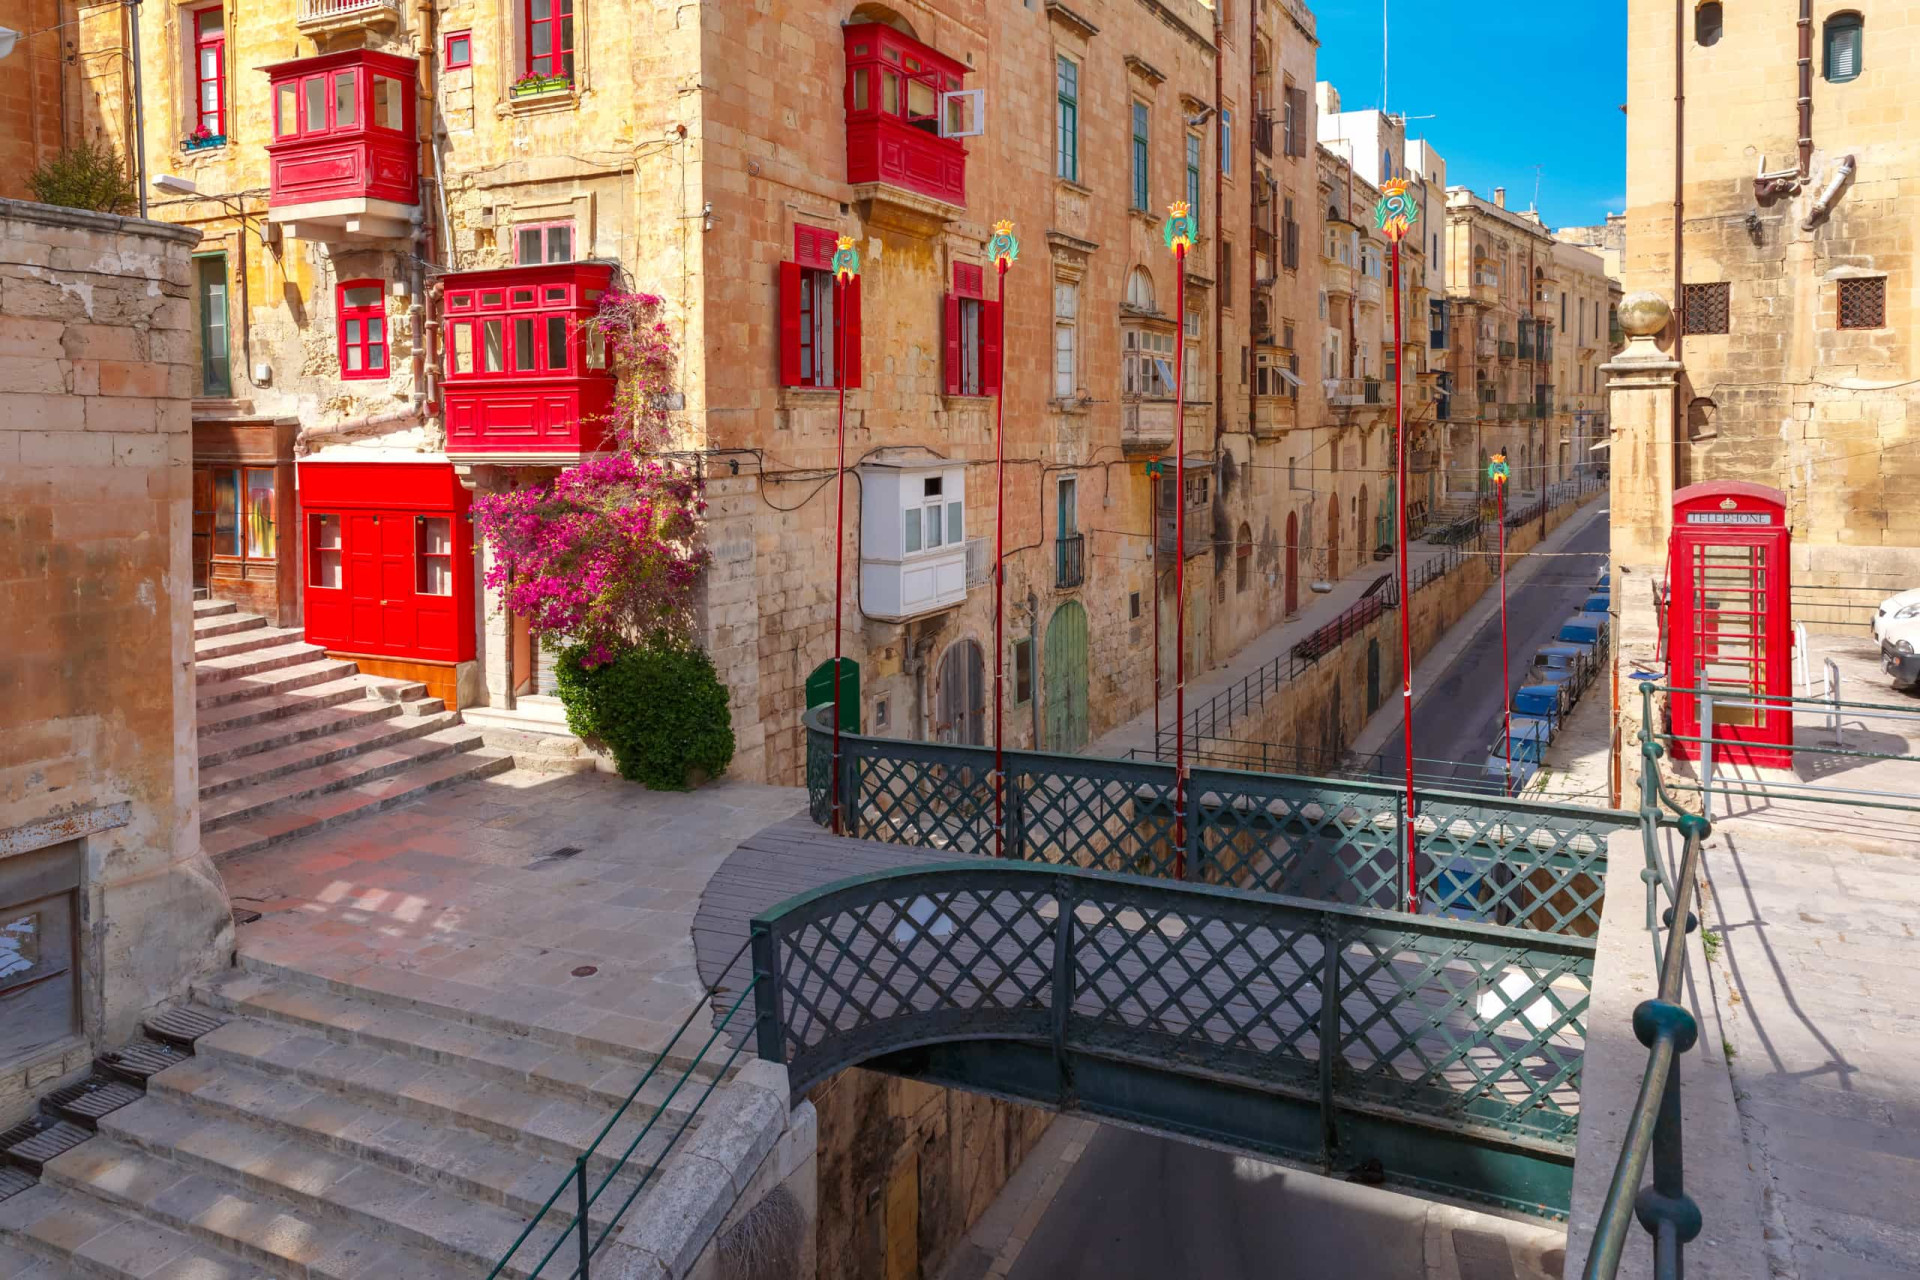 Malta is a great <a href="https://uk.starsinsider.com/travel/222457/incredible-european-destinations-that-are-surprisingly-cheap">budget destination,</a> possibly one of the best in Europe. Lodging in a dorm can go for as little as US$10 per night, while mid-range and budget hotels have rooms available for as little as US$20.<p>You may also like:<a href="https://www.starsinsider.com/n/218347?utm_source=msn.com&utm_medium=display&utm_campaign=referral_description&utm_content=397154v6en-us"> Smartphones that emit the most (and least) radiation</a></p>